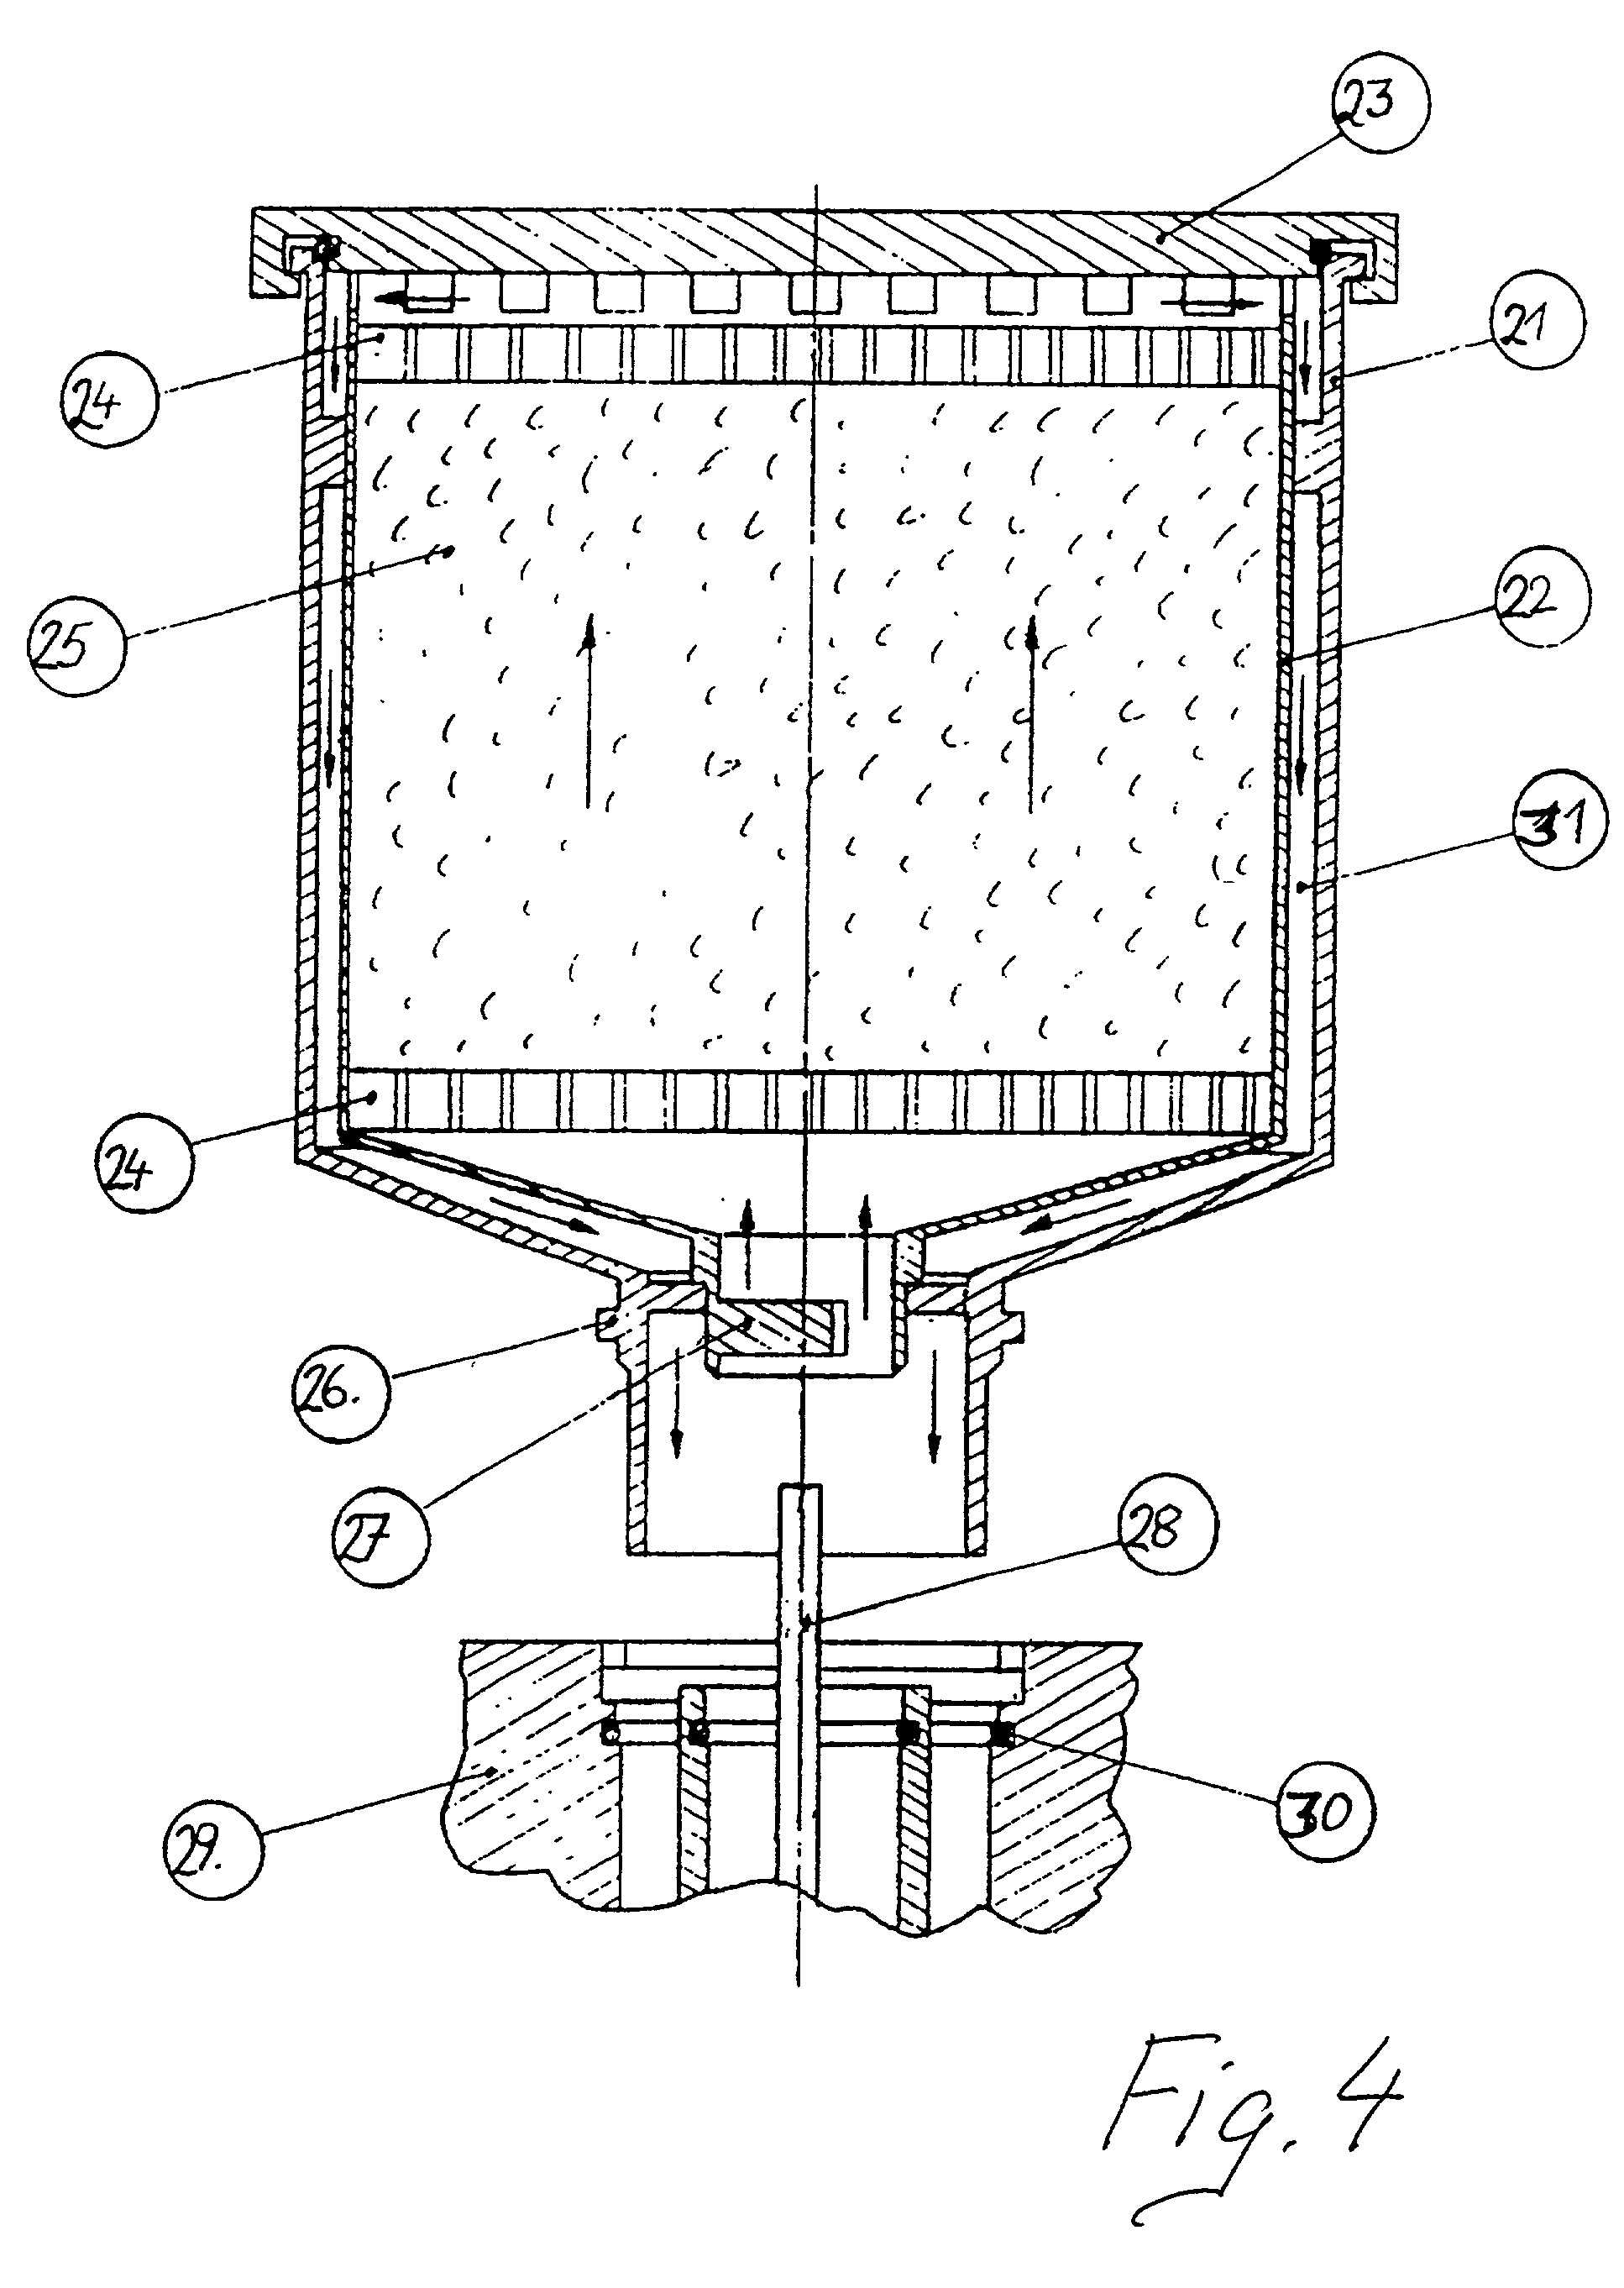 Device for anaesthetic systems